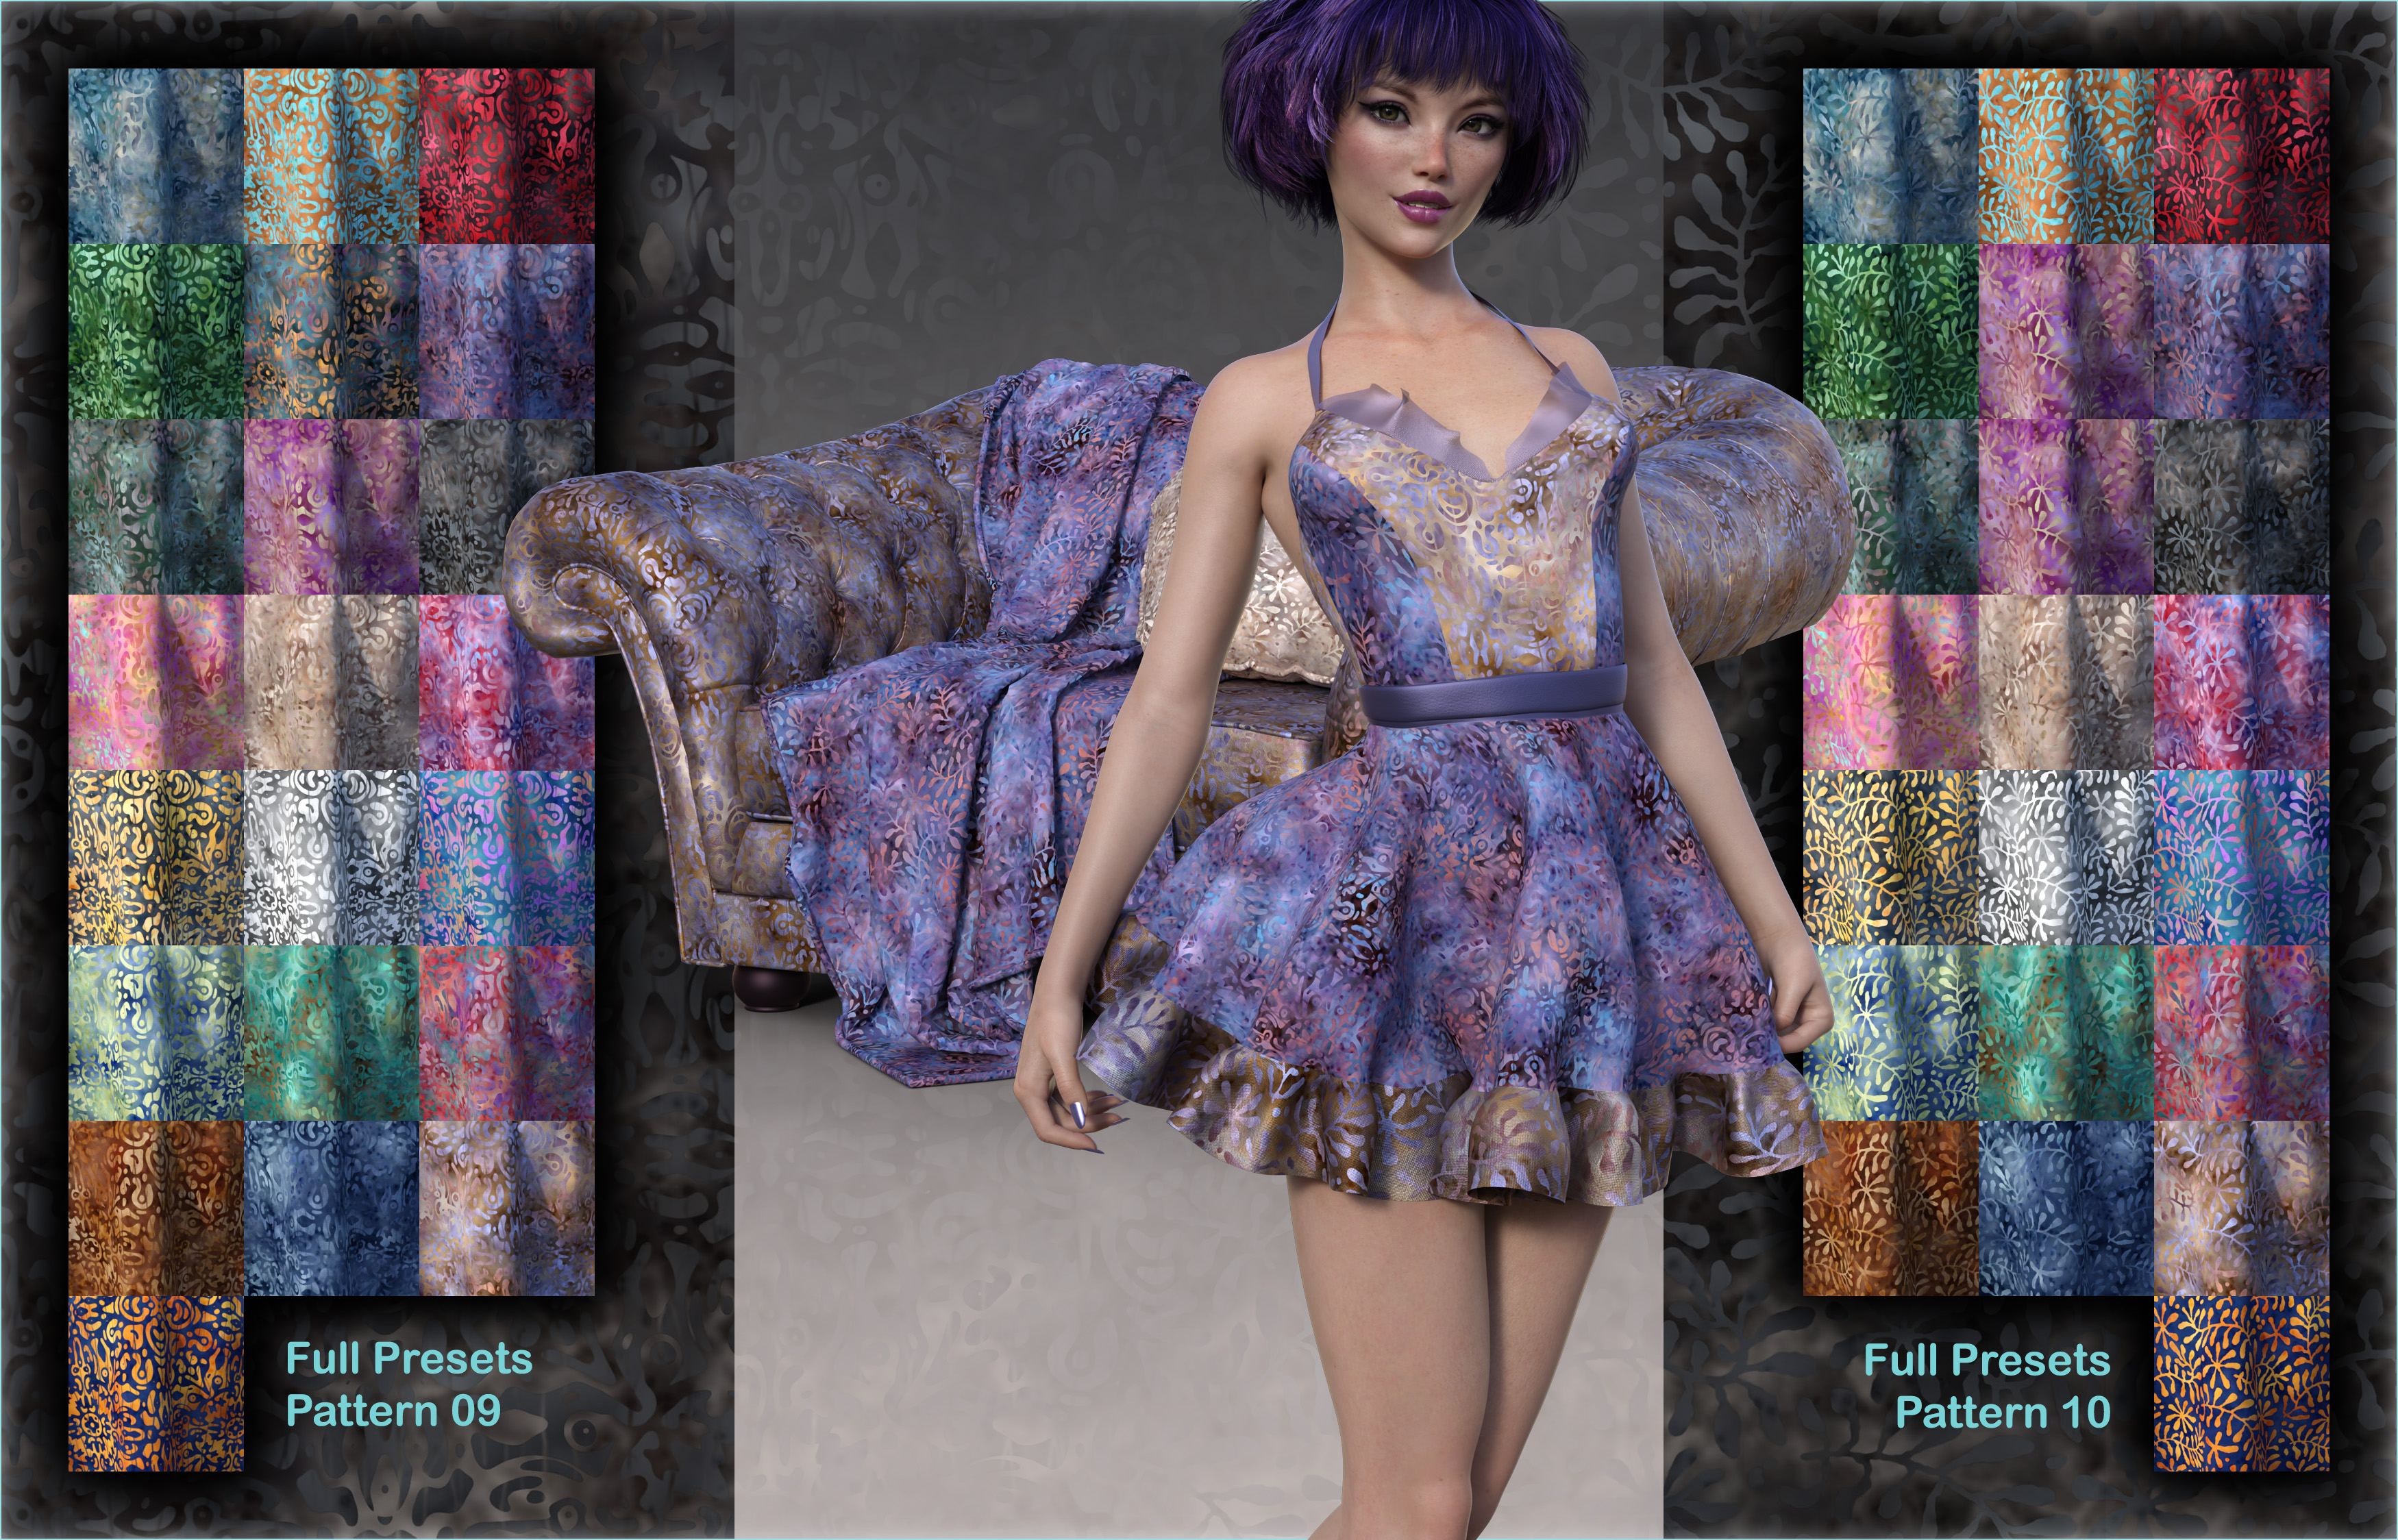 Pd Batik Iray Shaders by: parrotdolphin, 3D Models by Daz 3D